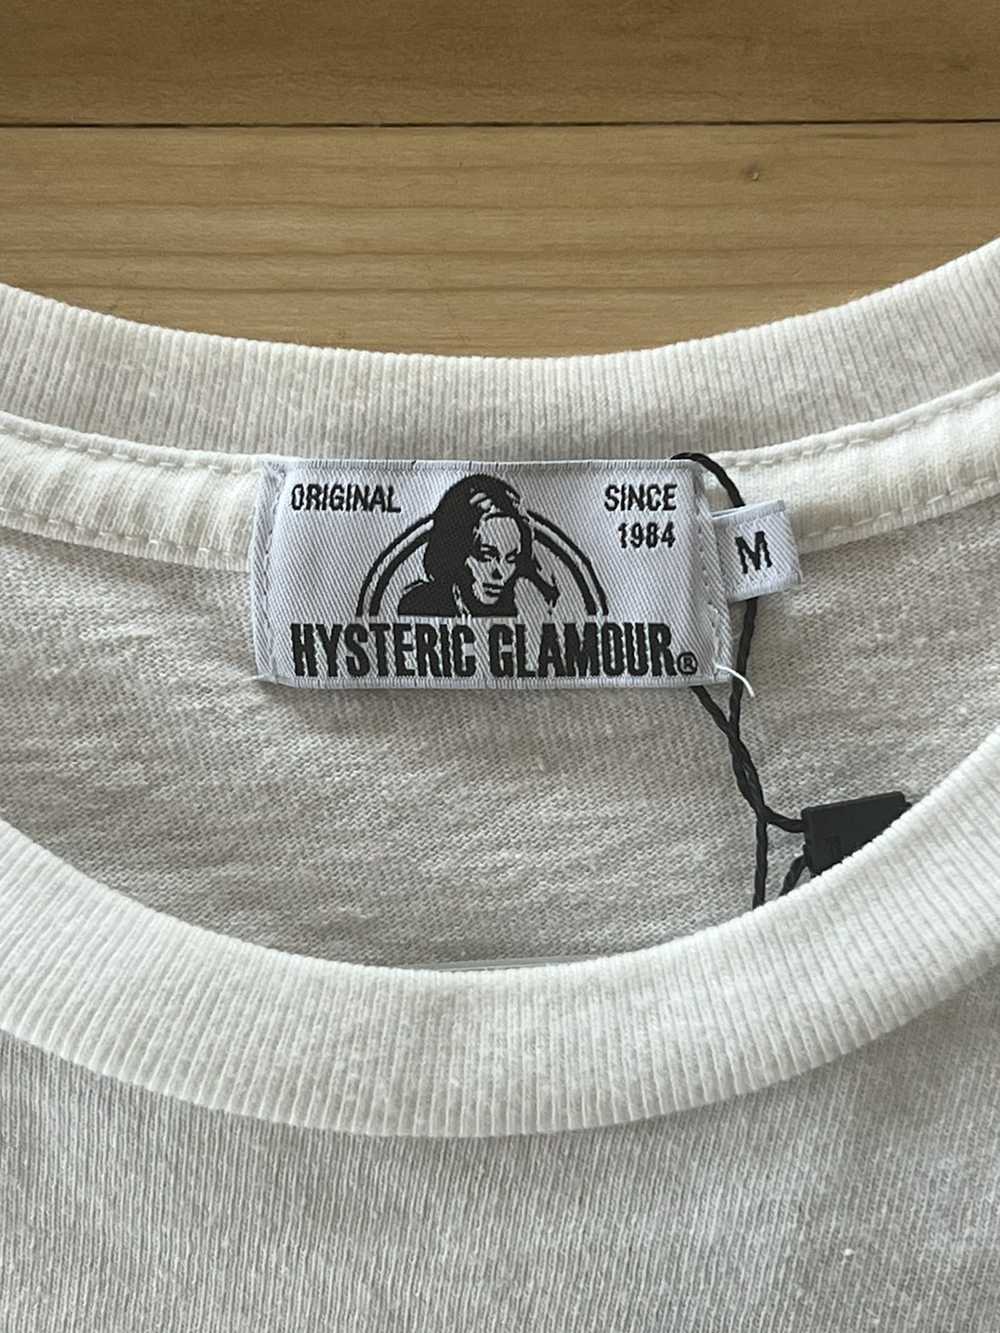 Hysteric Glamour Hysteric Glamour “You Genius Me … - image 4